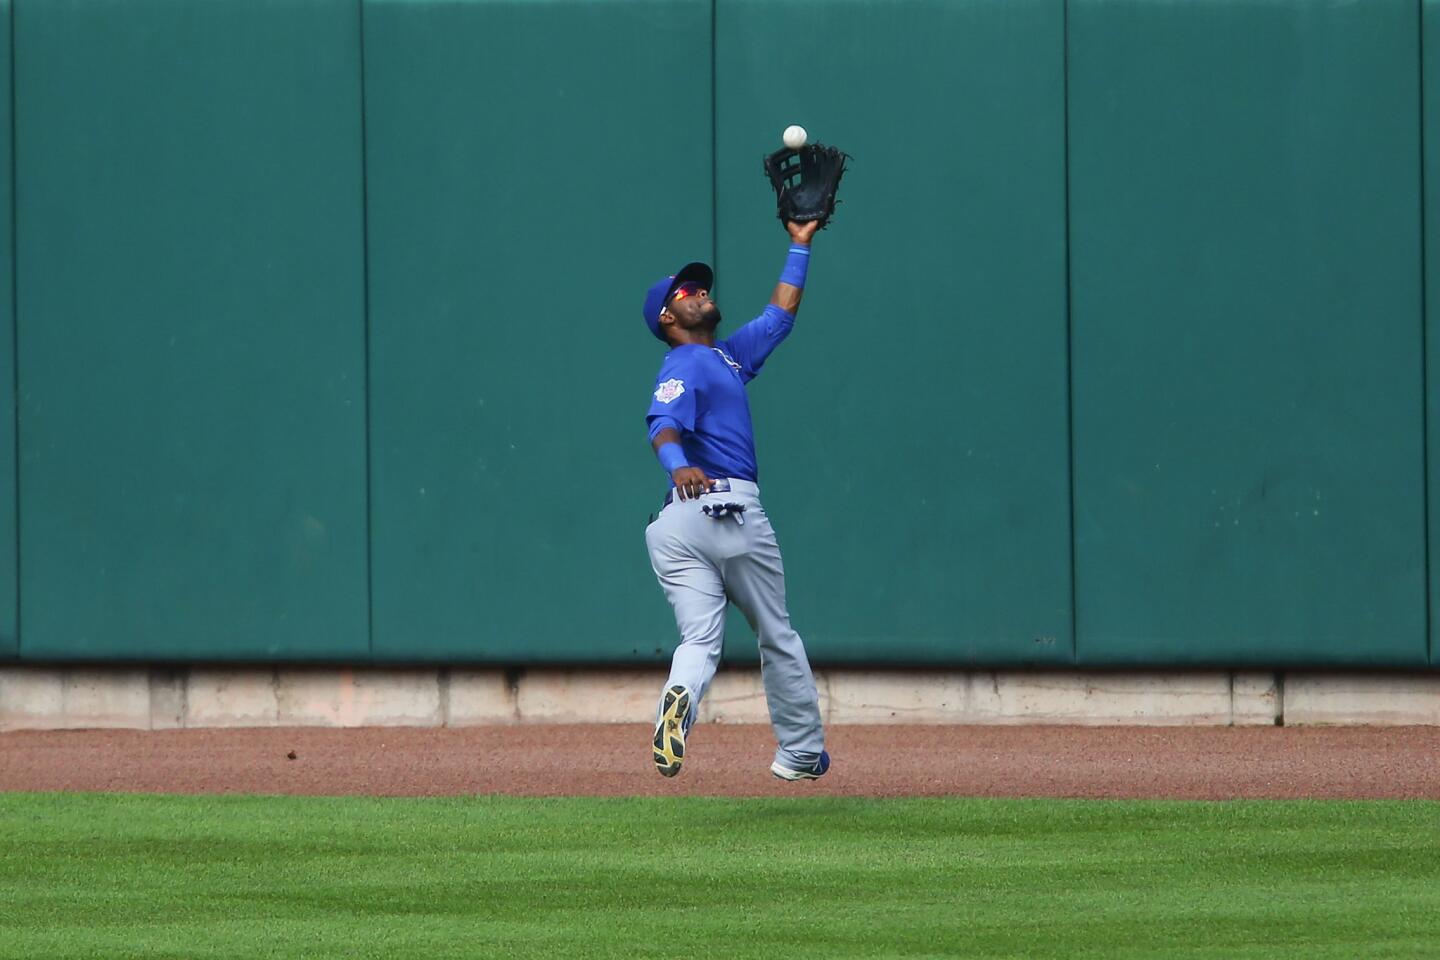 Arismendy Alcantara catches a fly ball in the ninth inning.